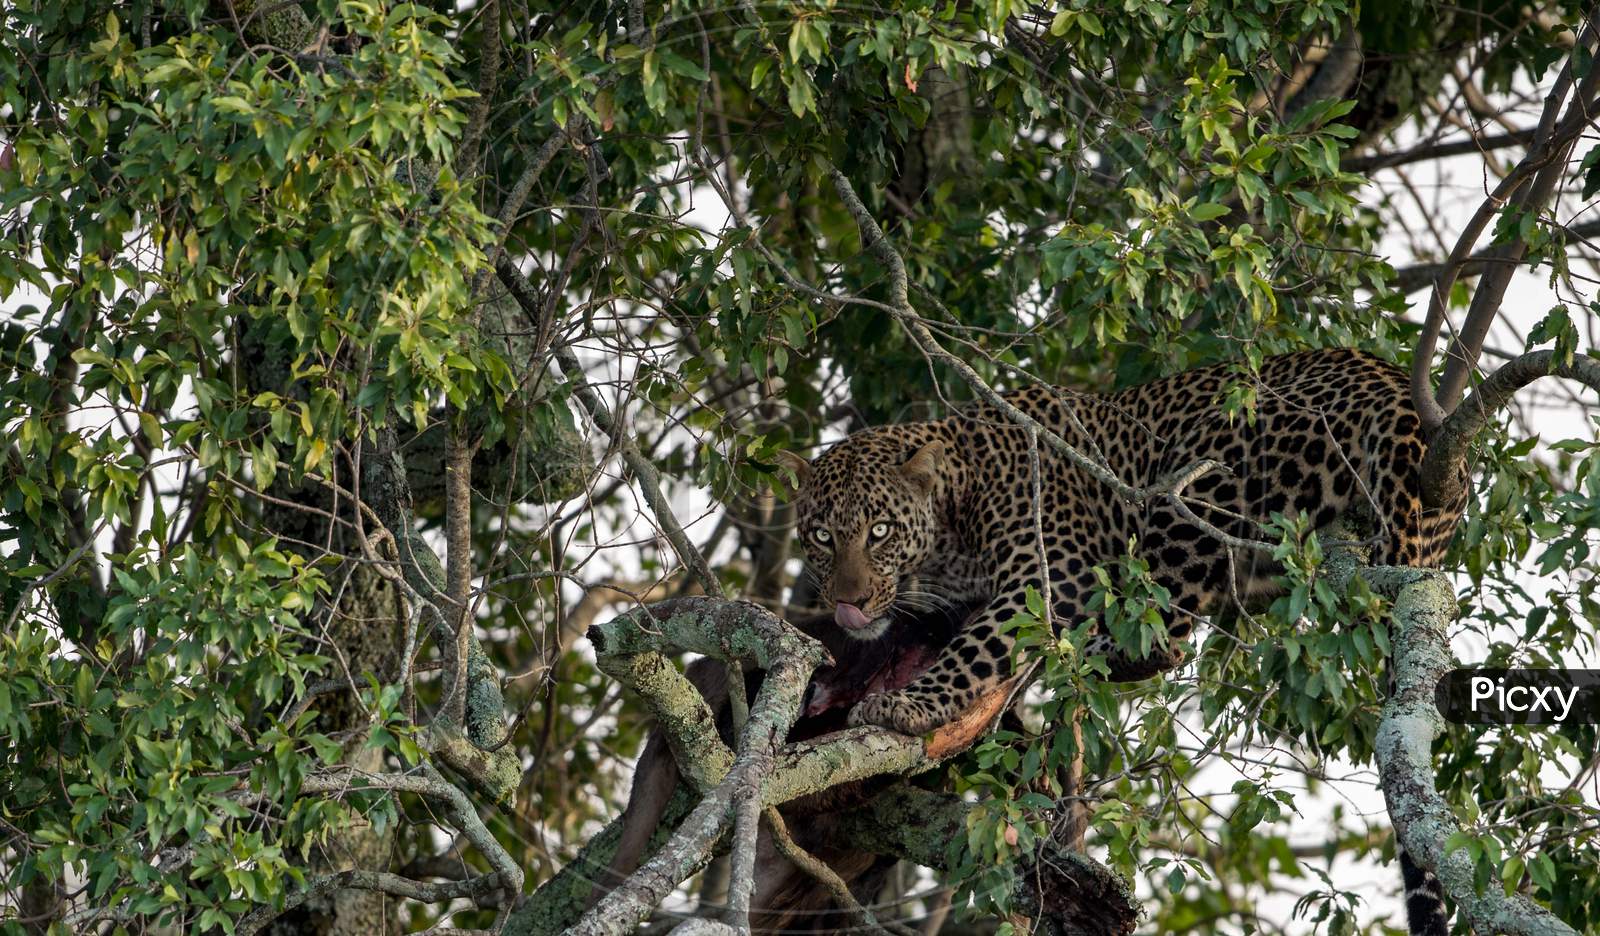 Leopard watching over its prey